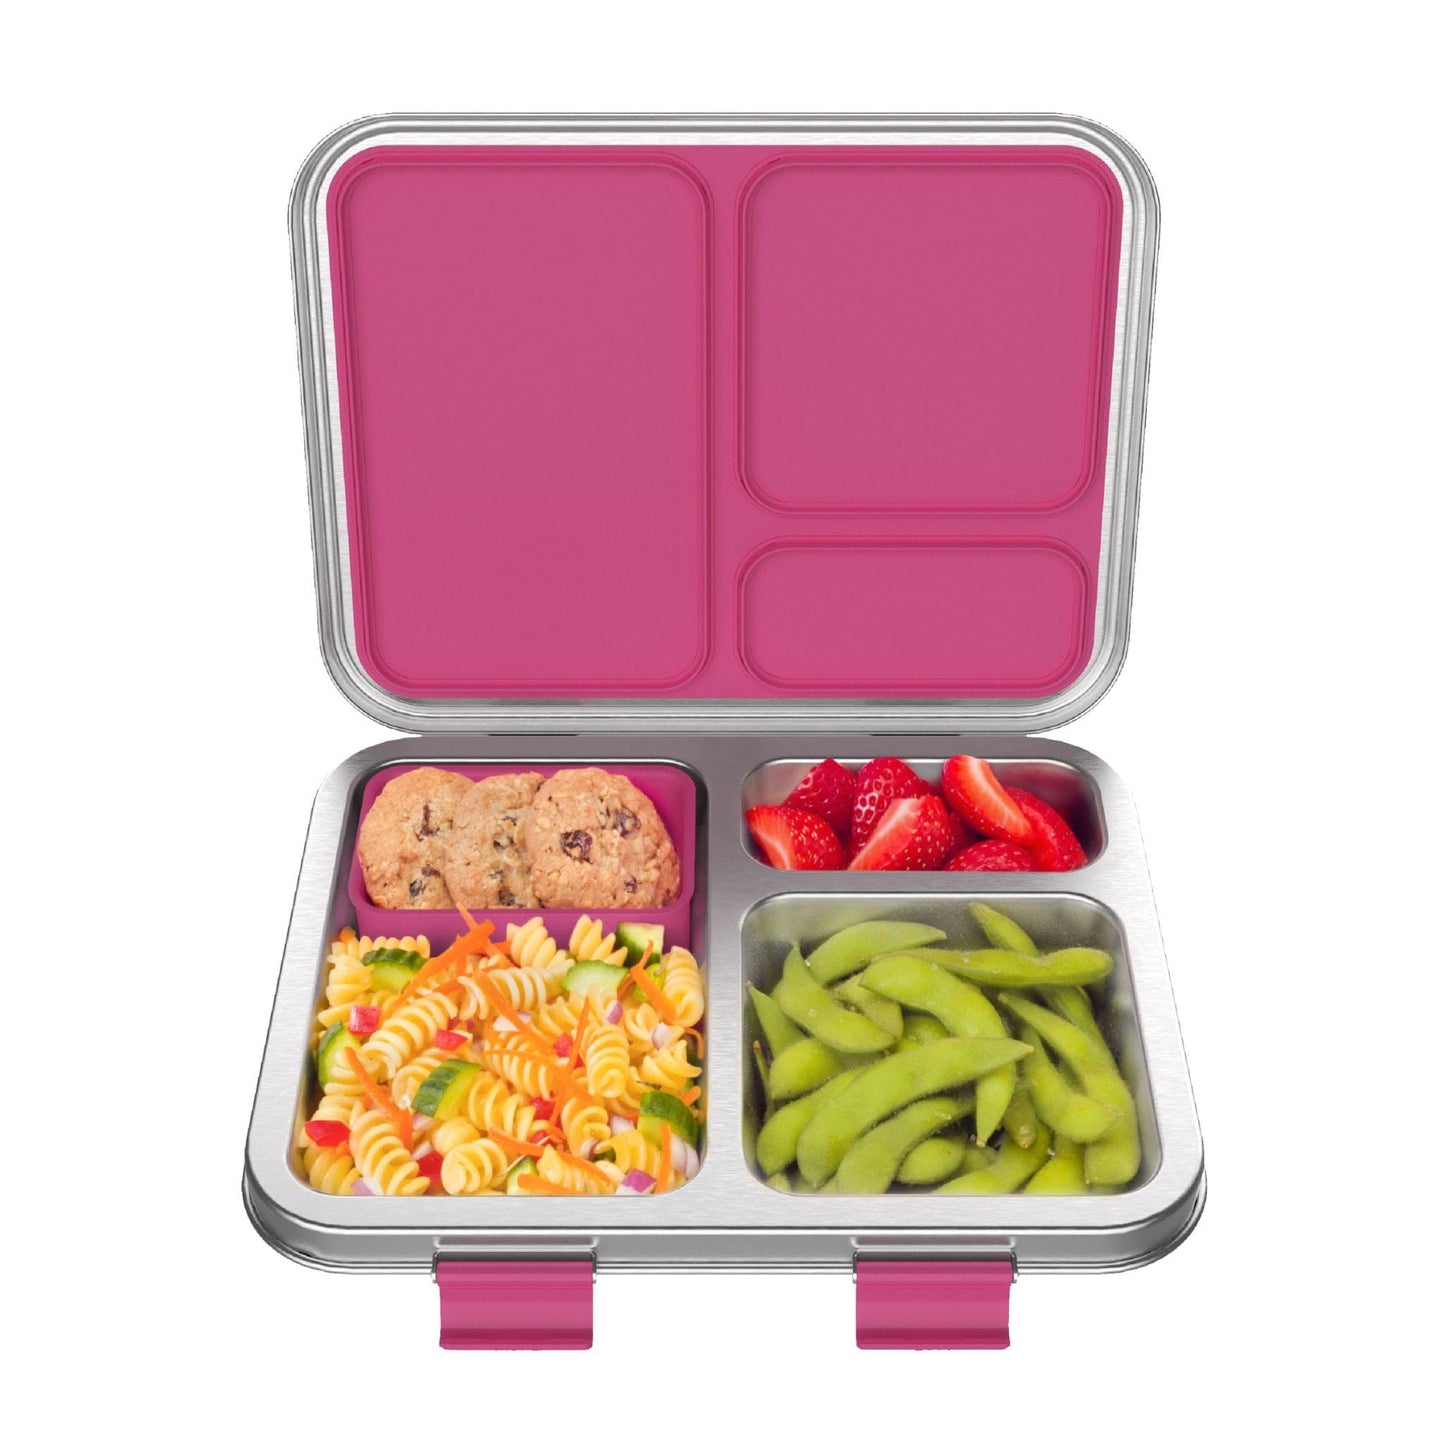 Bentgo Kids Three Compartment Leakproof Stainless Steel Lunch Box